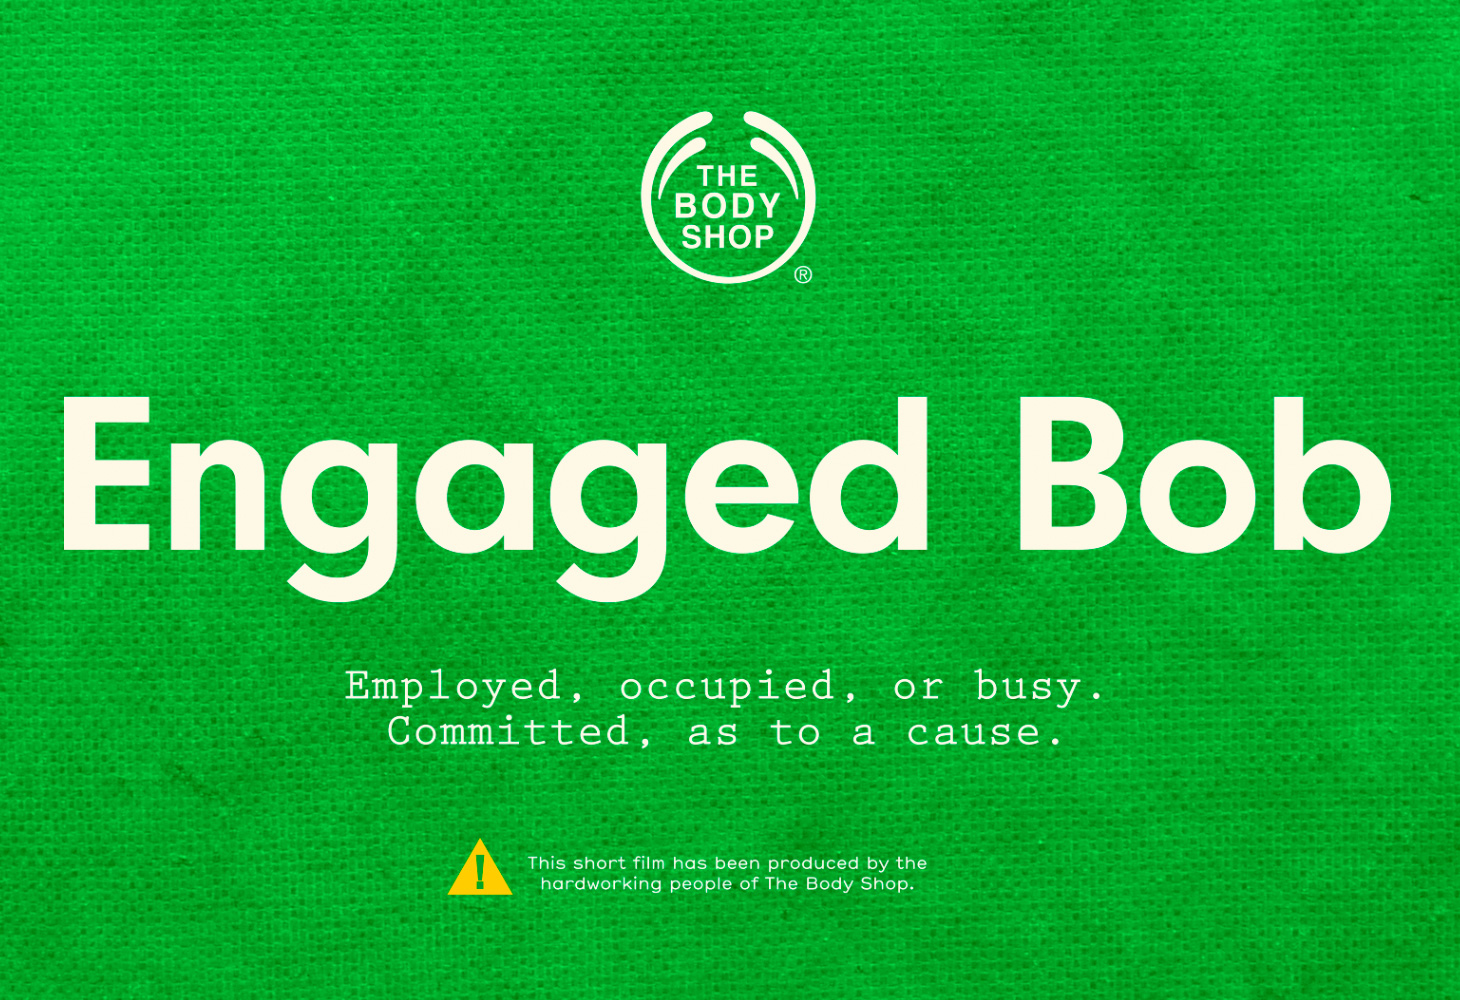 The Body Shop - Engaged Bob - Engaged people grow business